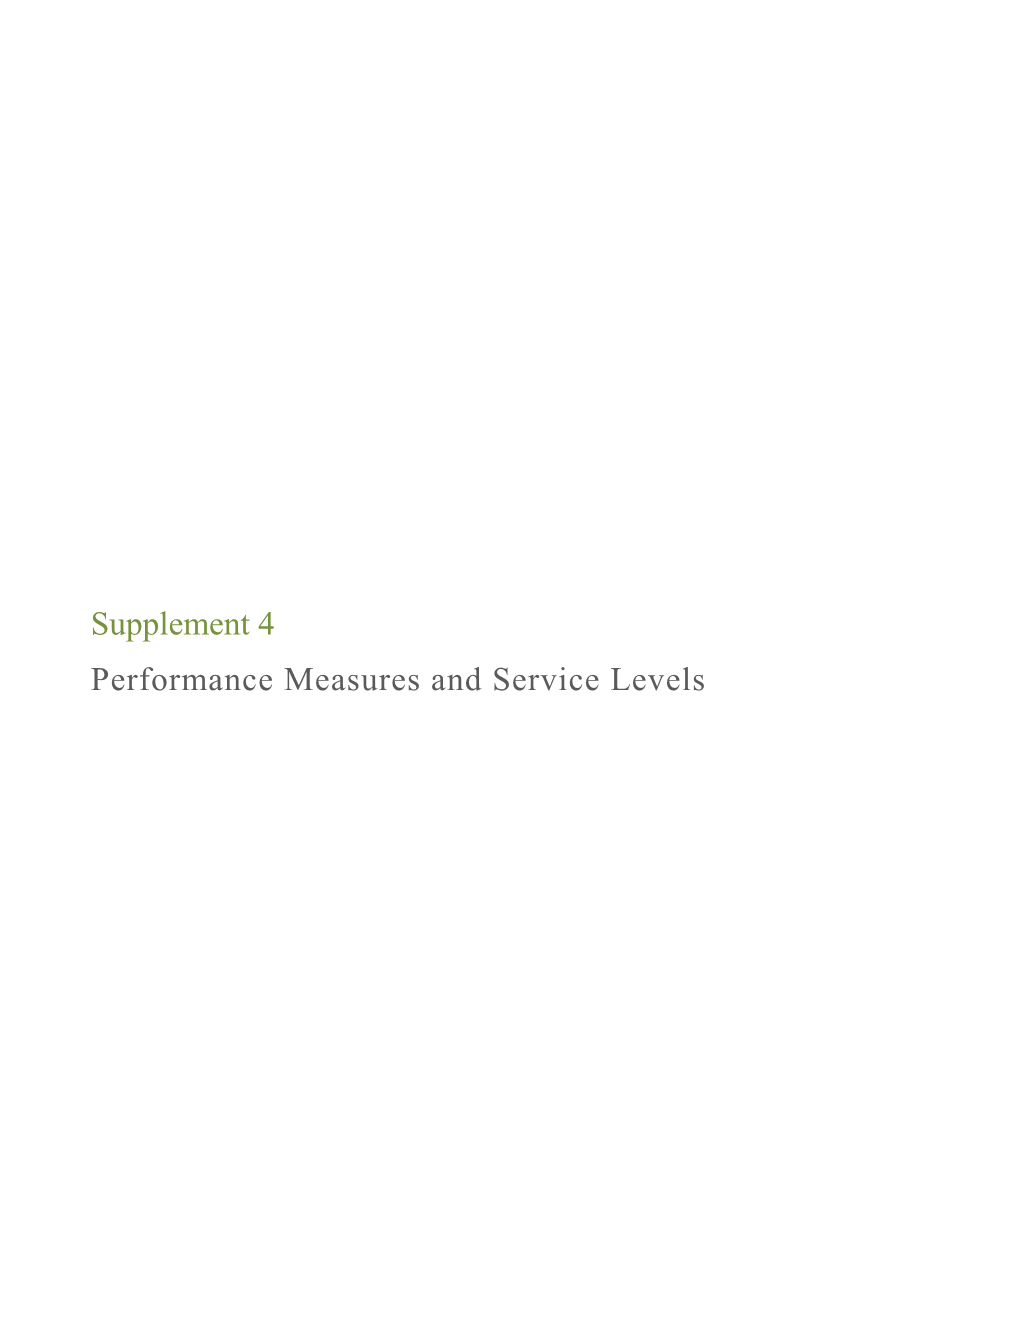 Performance Measures and Service Levels